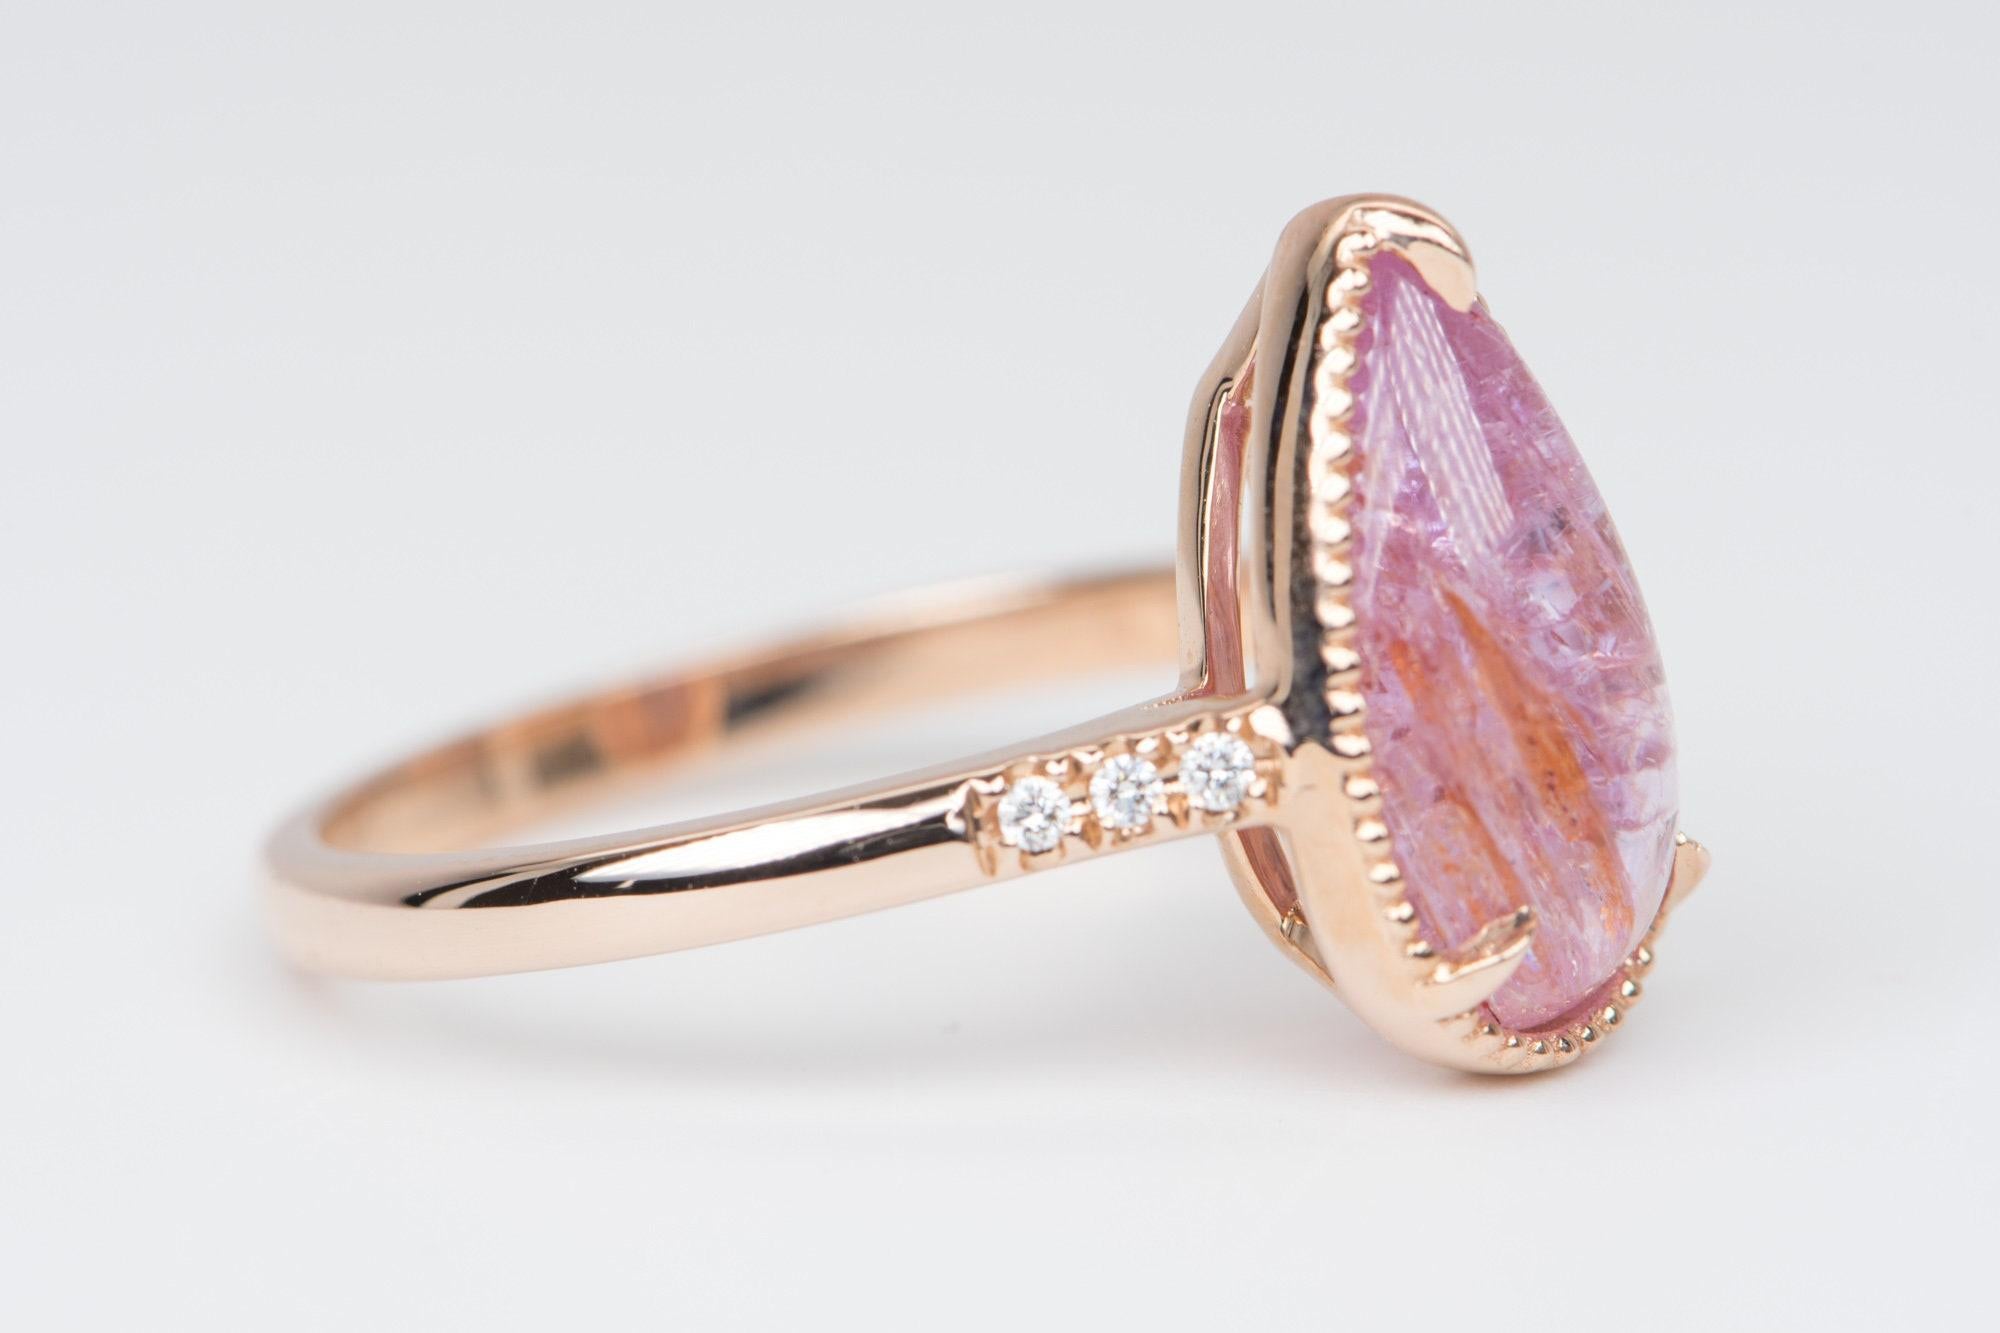 â™¥ A solid 14k rose gold ring set with an elongated pear shaped pink imperial topaz stone in the center, with trio diamond accent on each side
â™¥ The overall setting measures 8.4mm in width, 14.4mm in length, and sits 7mm tall from the